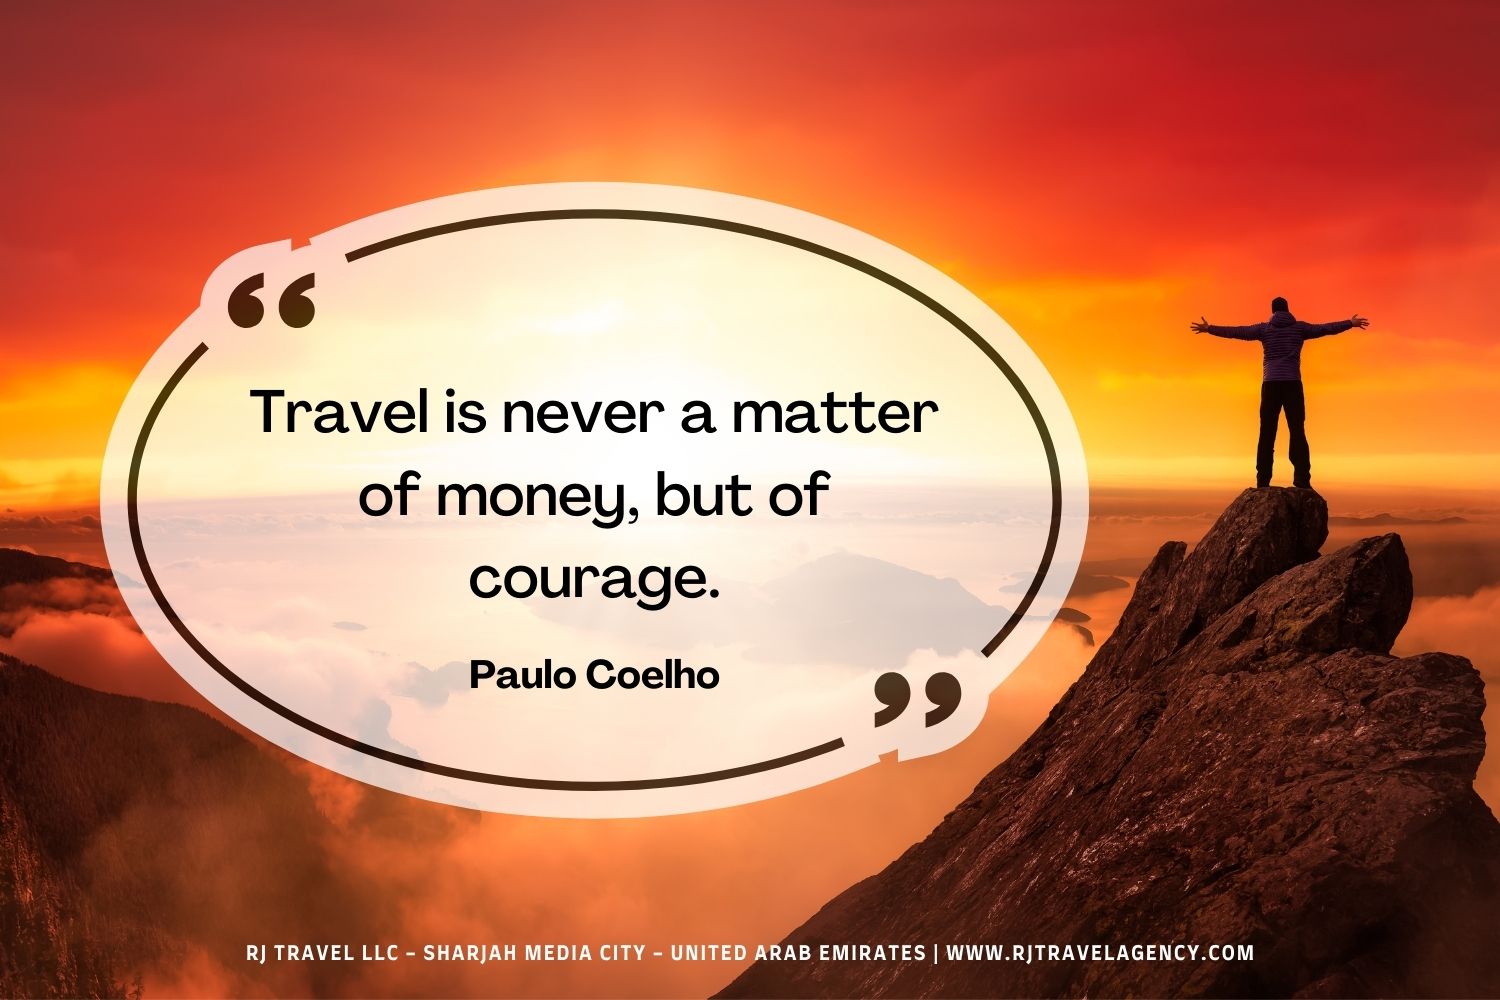 Quotes about traveling